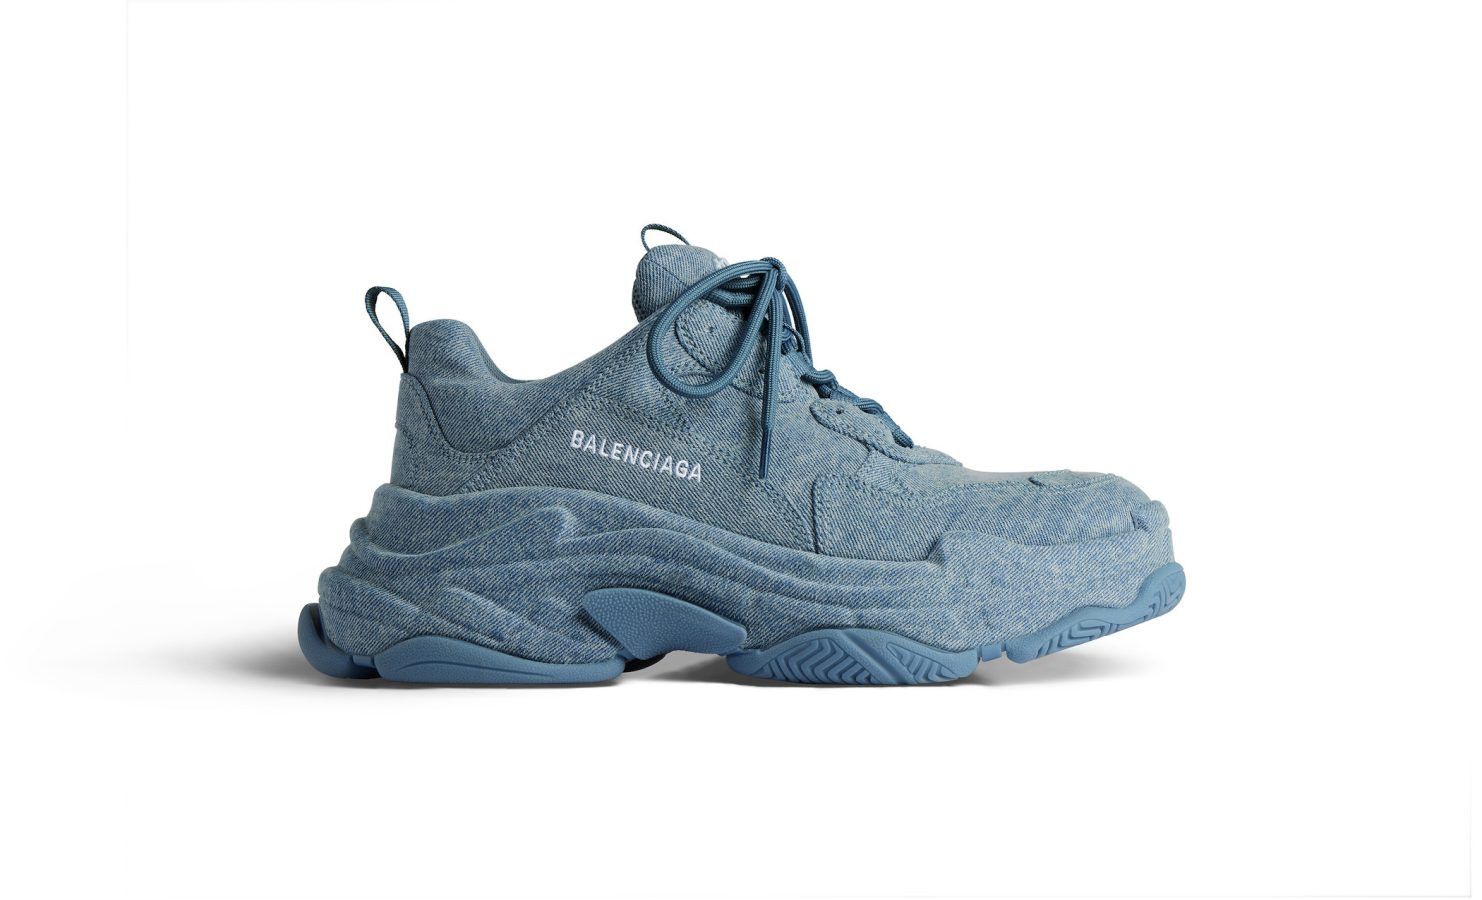 Balenciaga's Triple S sneakers get denim makeover this summer